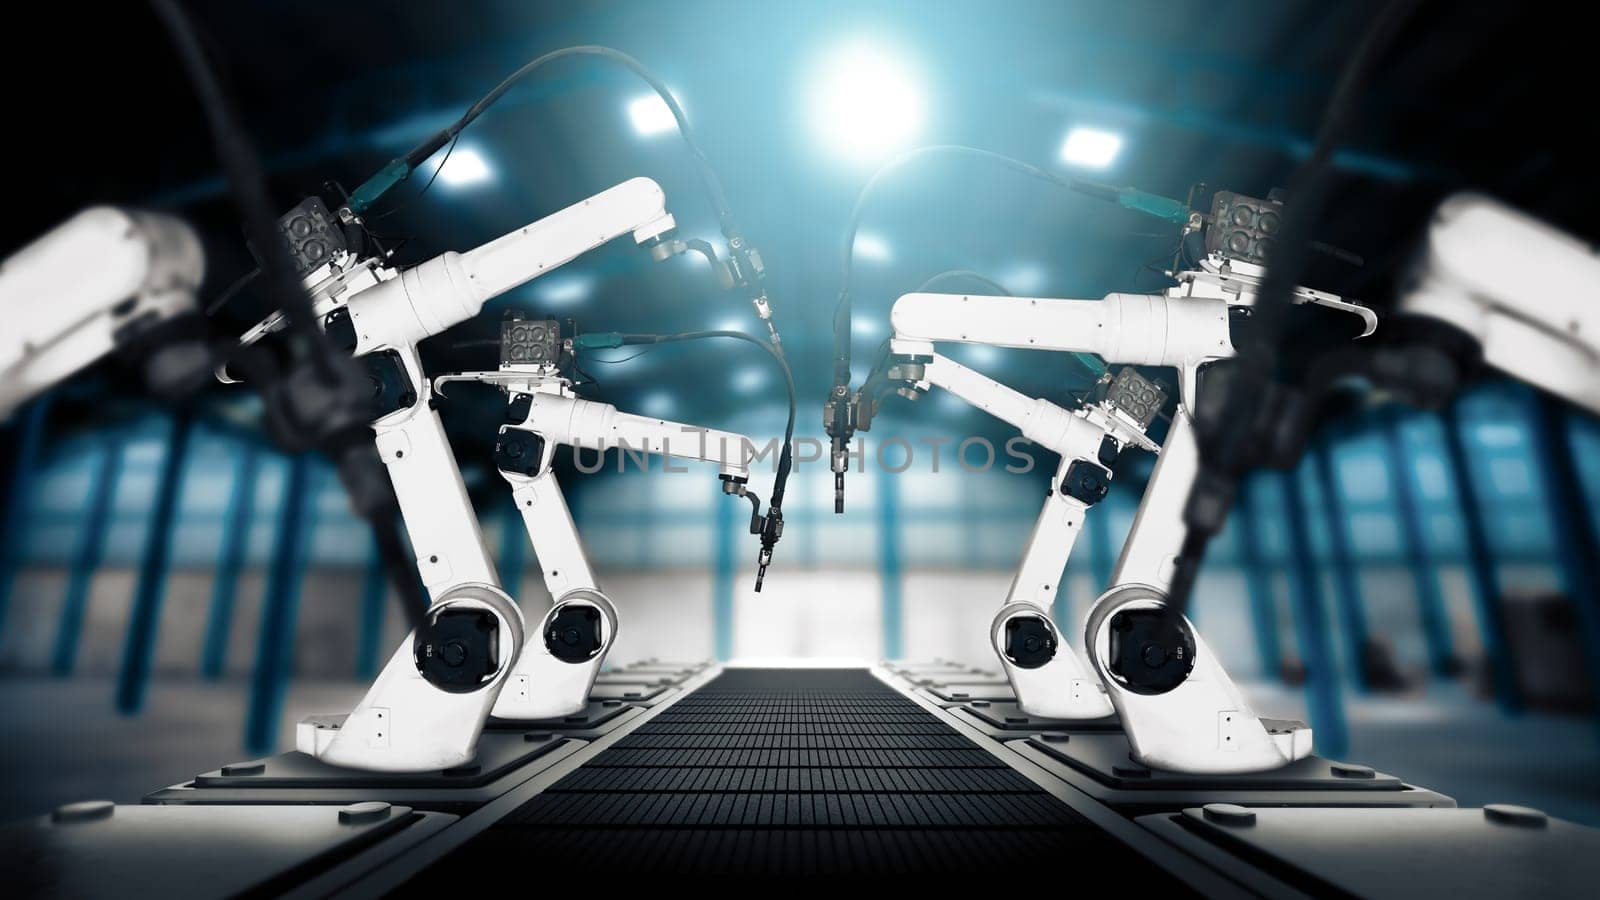 XAI Mechanized industry robot arm for assembly in factory production line. Concept of artificial intelligence for industrial revolution and automation manufacturing process.